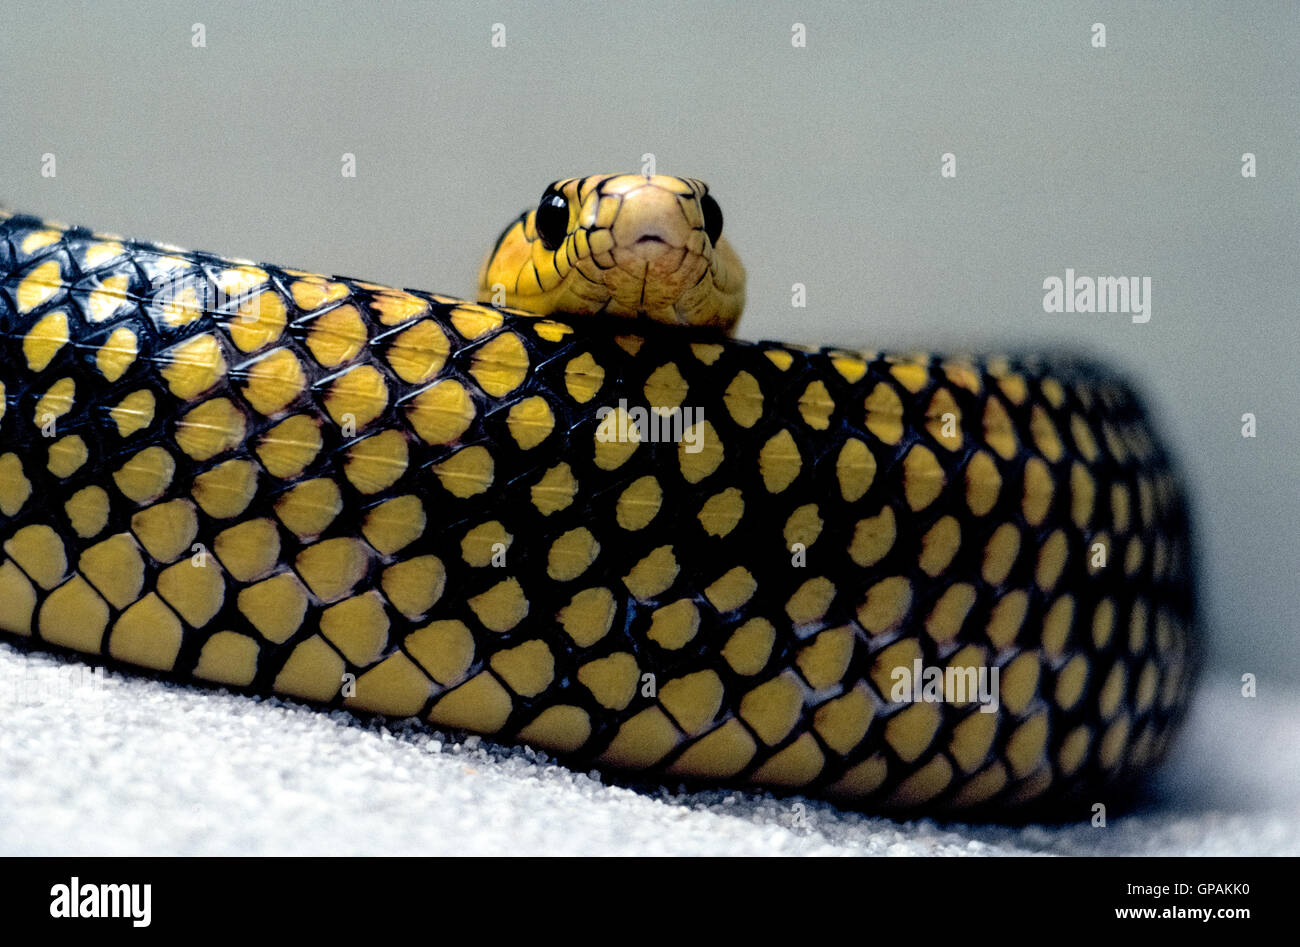 The head of a Tiger Rat snake peers over a section of its coiled body that has a black skin with a distinctive pattern of yellow spots. The scientific name of this lengthy nonvenomous snake is Spilotes pullatus, but its other common names include yellow rat snake and chicken snake. Stock Photo